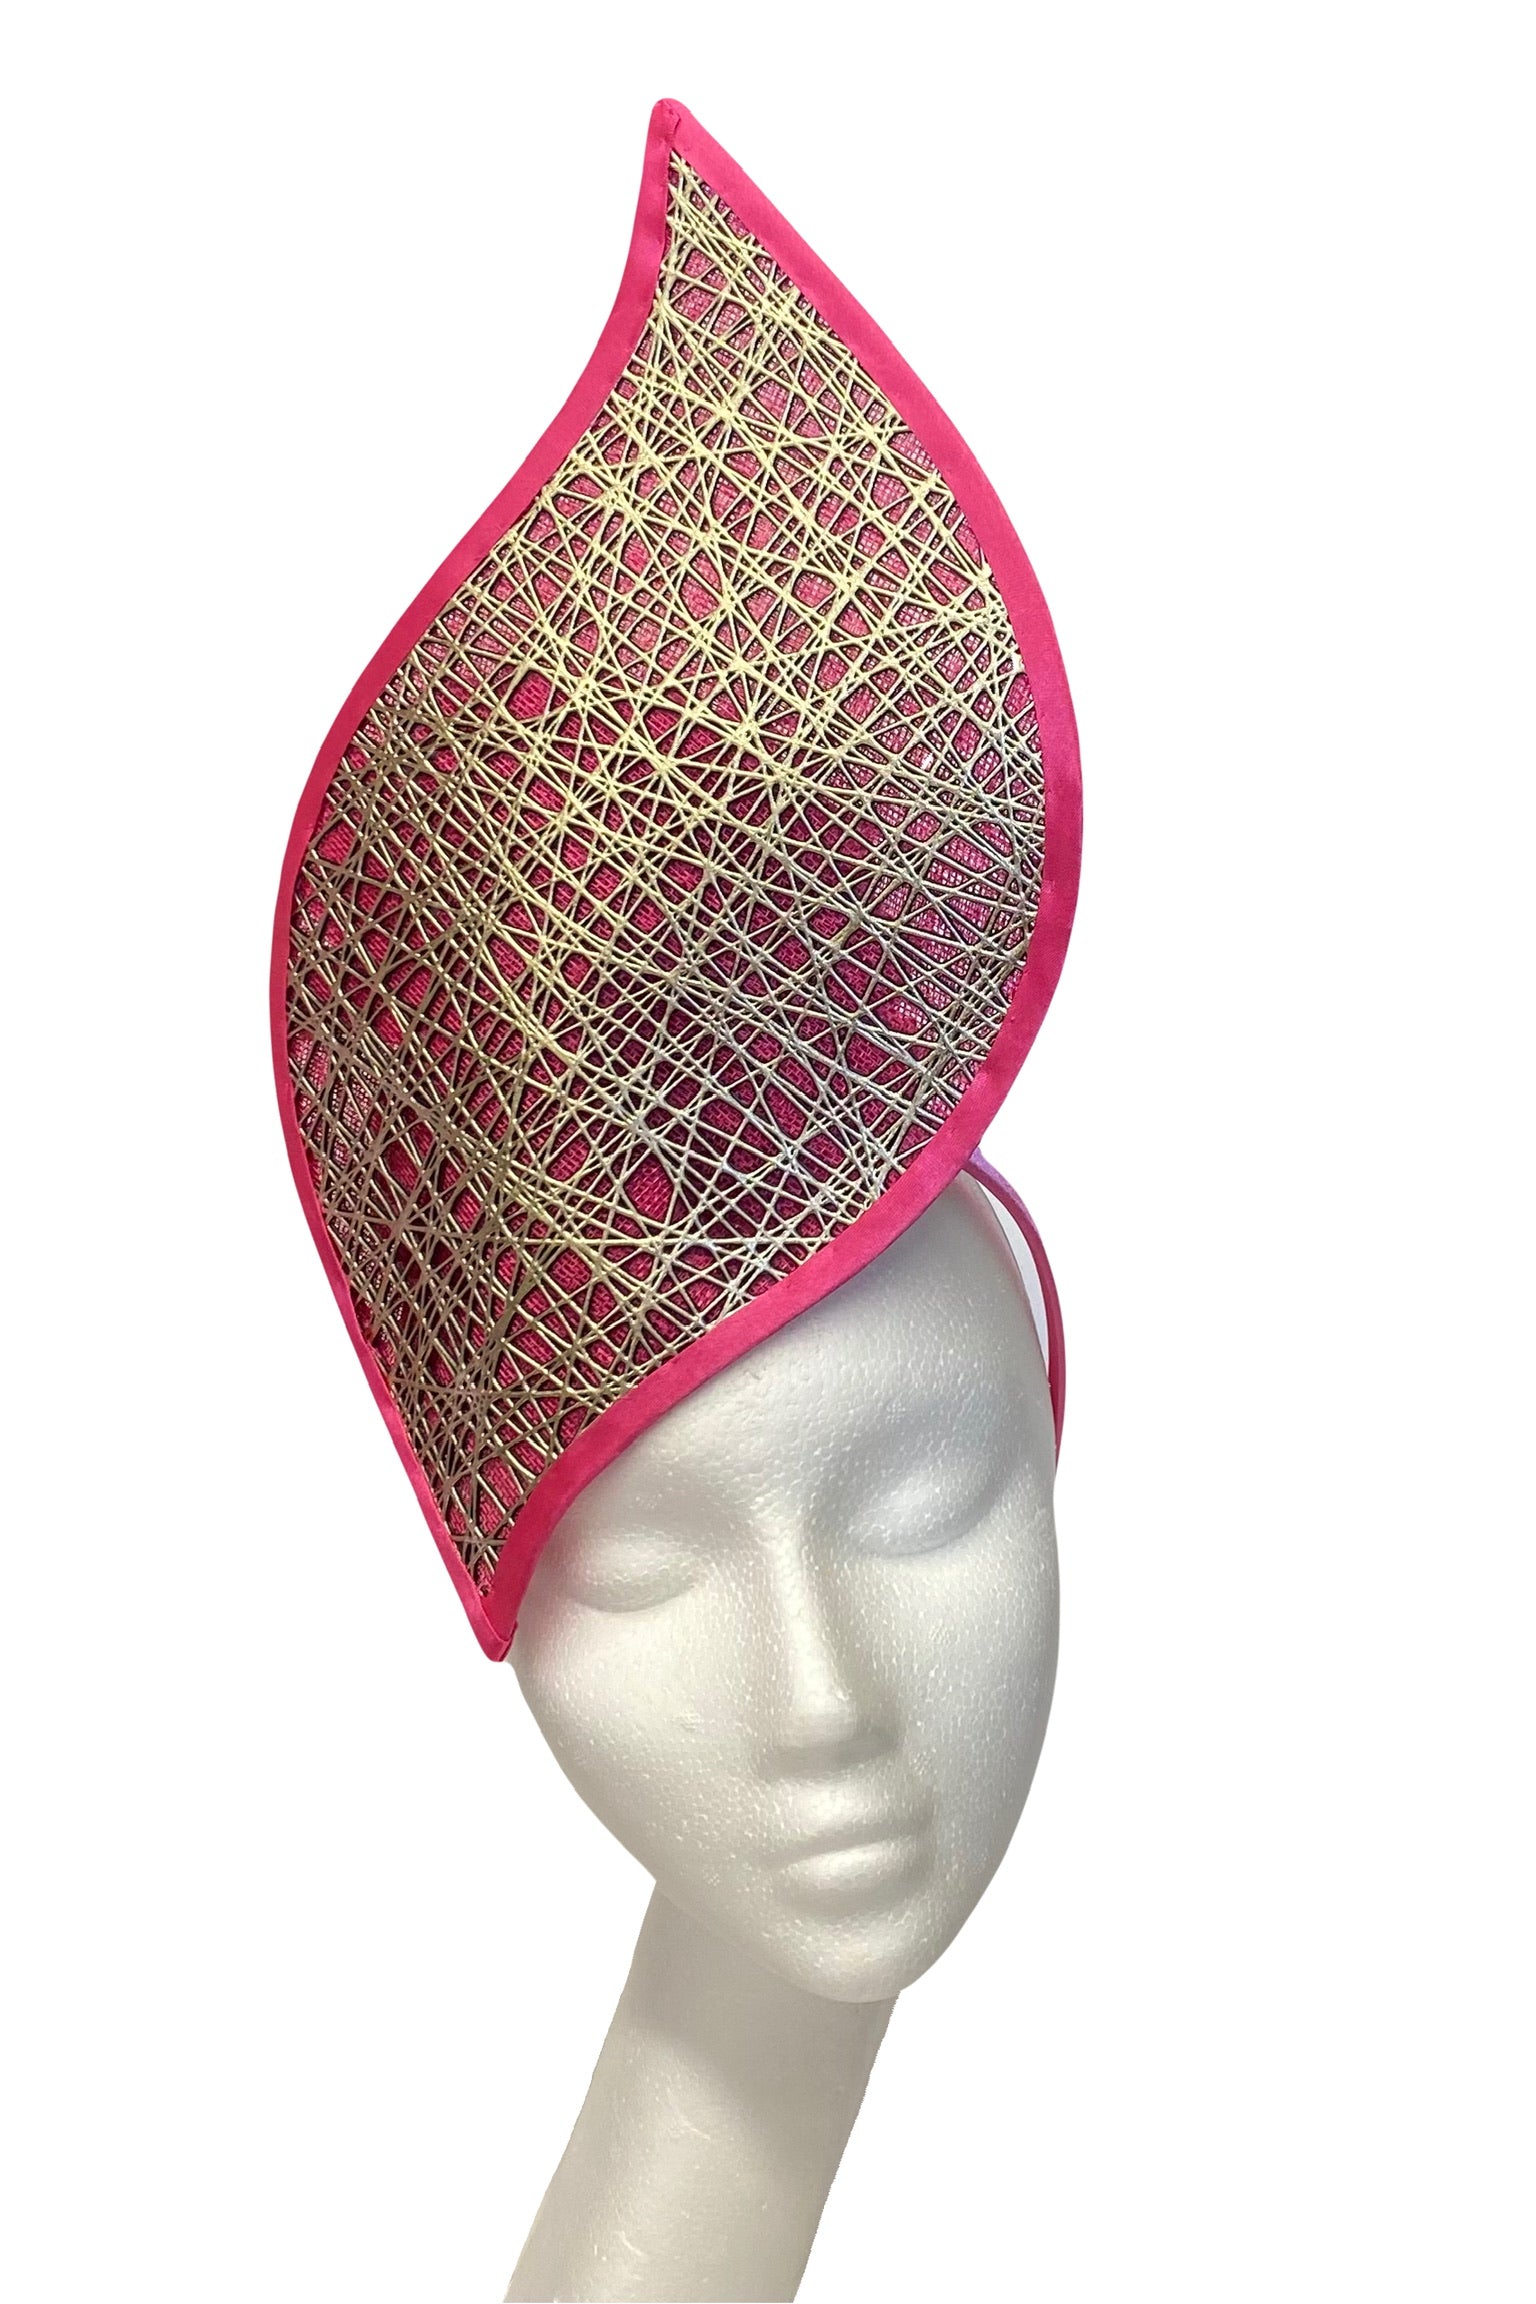 Hot Pink and gold designer headpiece